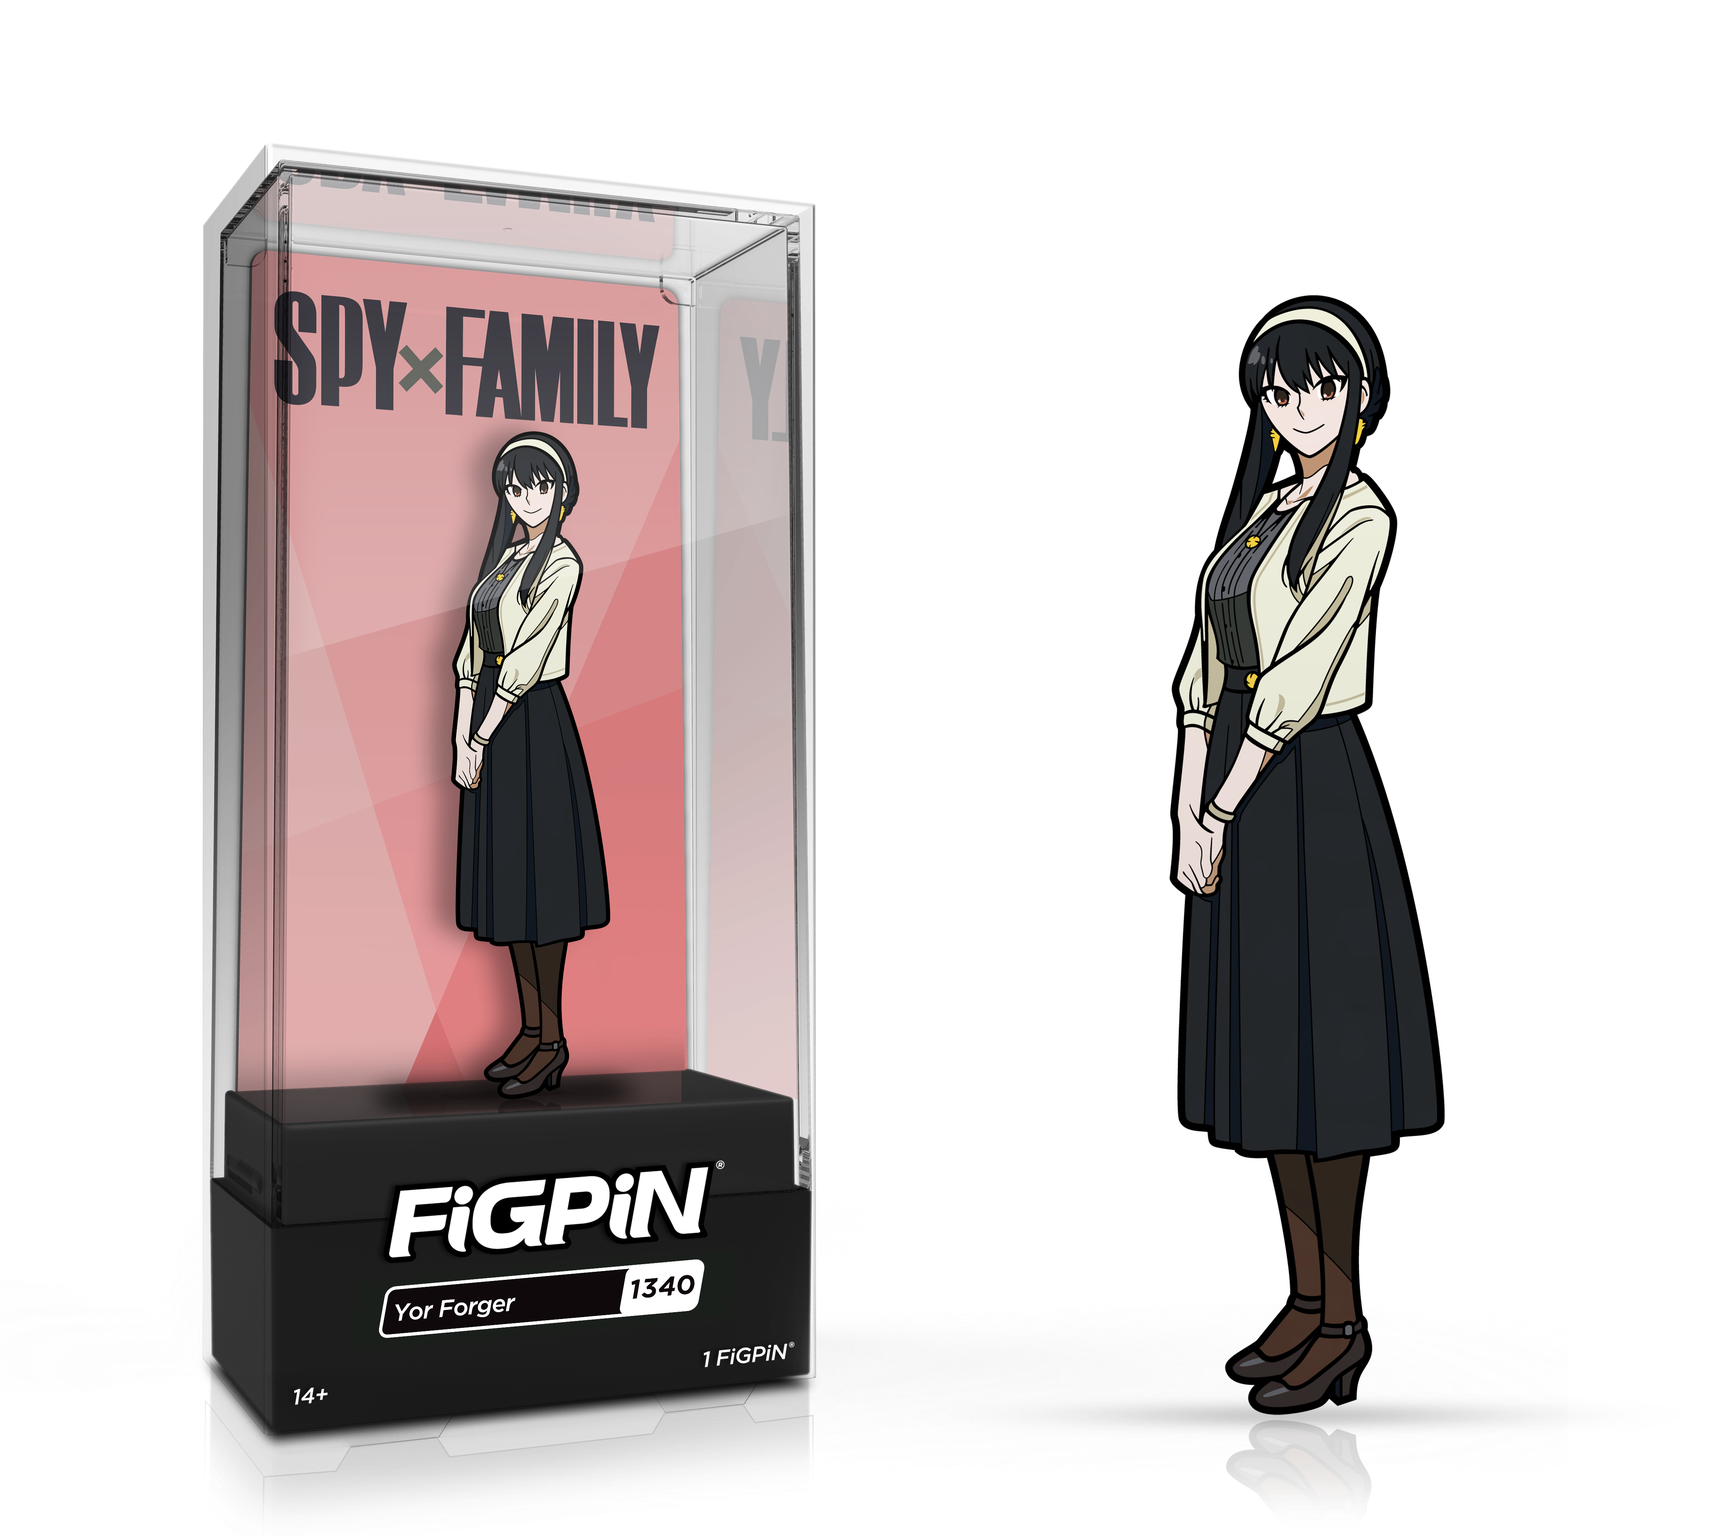 Spy X Family - Yor Forger (#1340) FiGPiN image count 0